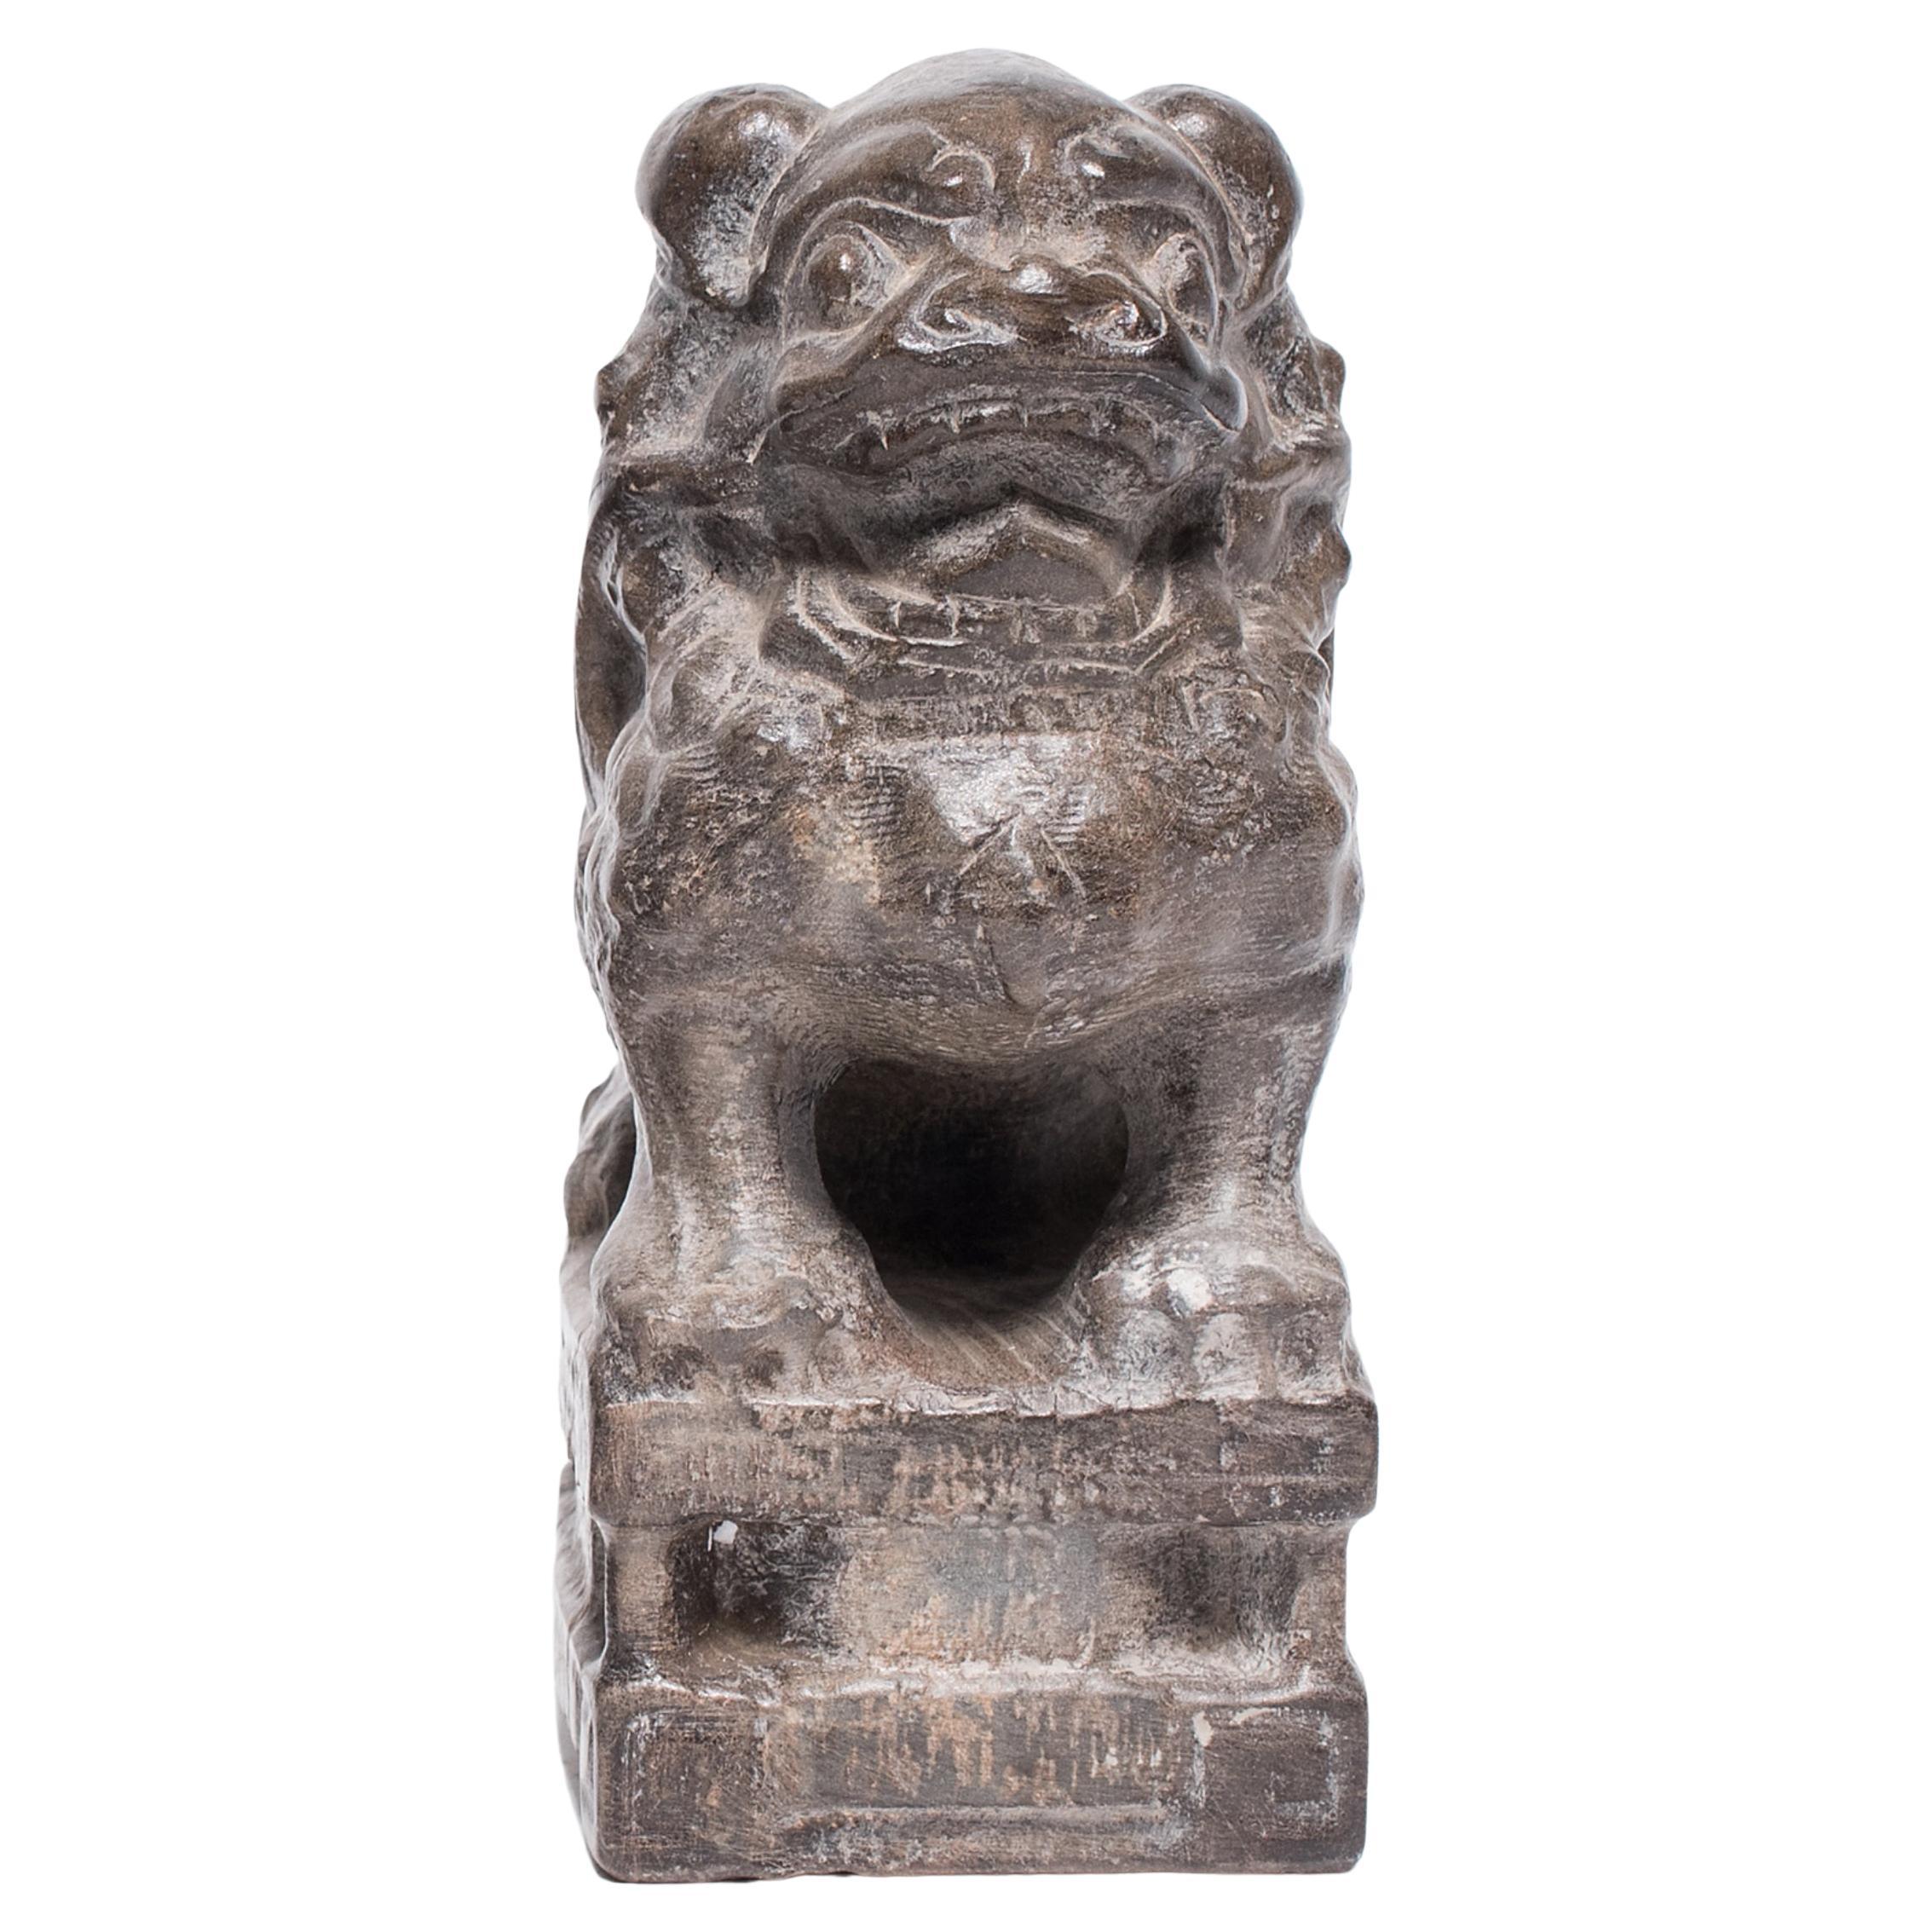 With a curly mane and a lively expression, this petite stone fu dog is an adorable companion and a benevolent guardian of the home. Known as shizi, the mythical dog is thought to offer protection from malevolent spirits and misfortune. A miniature